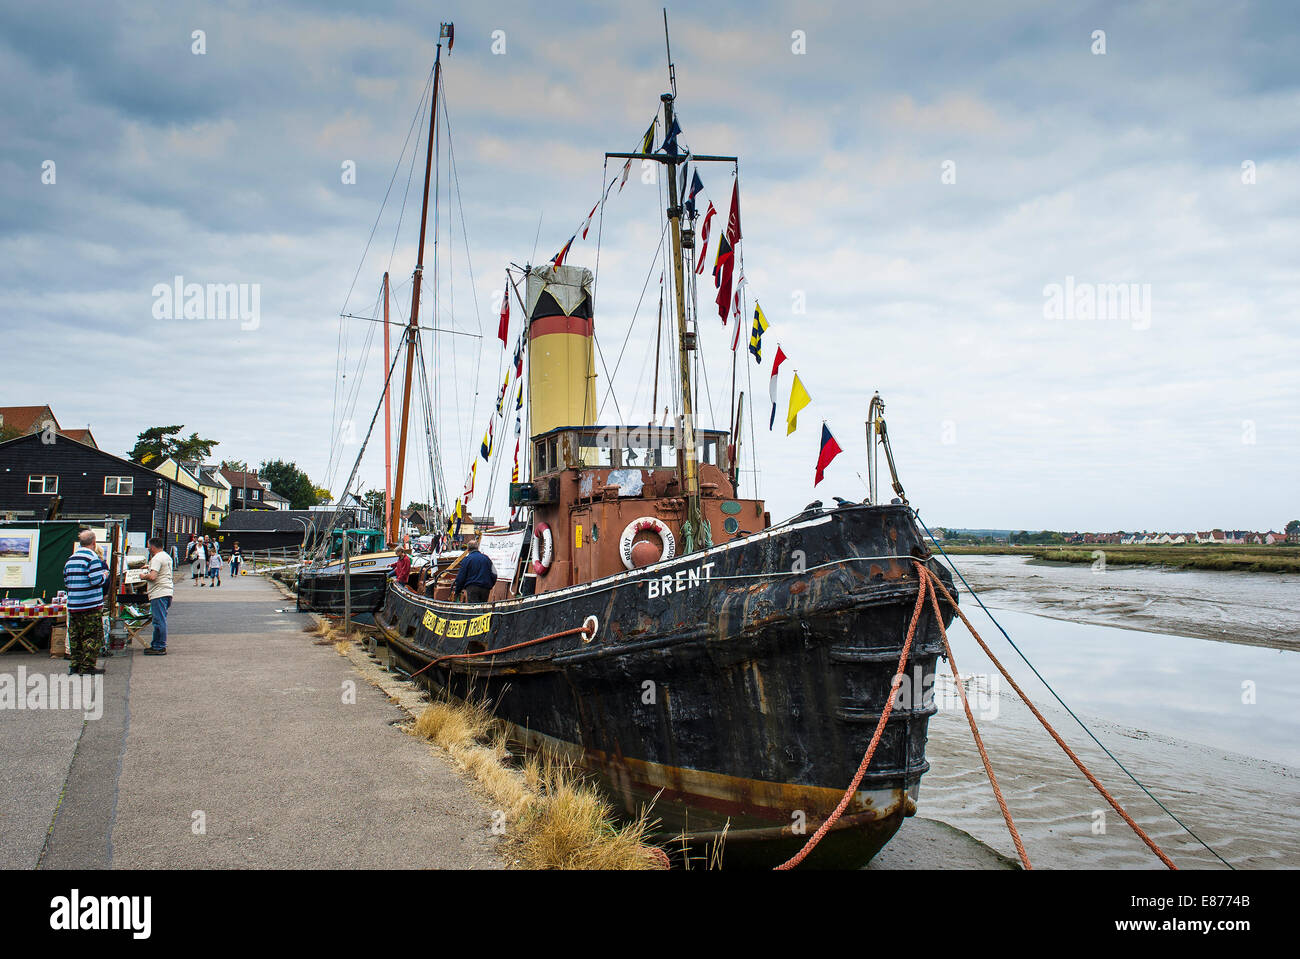 The Steam Tug Brent moored at the Hythe Quay in Maldon on the Blackwater River in Essex. Stock Photo